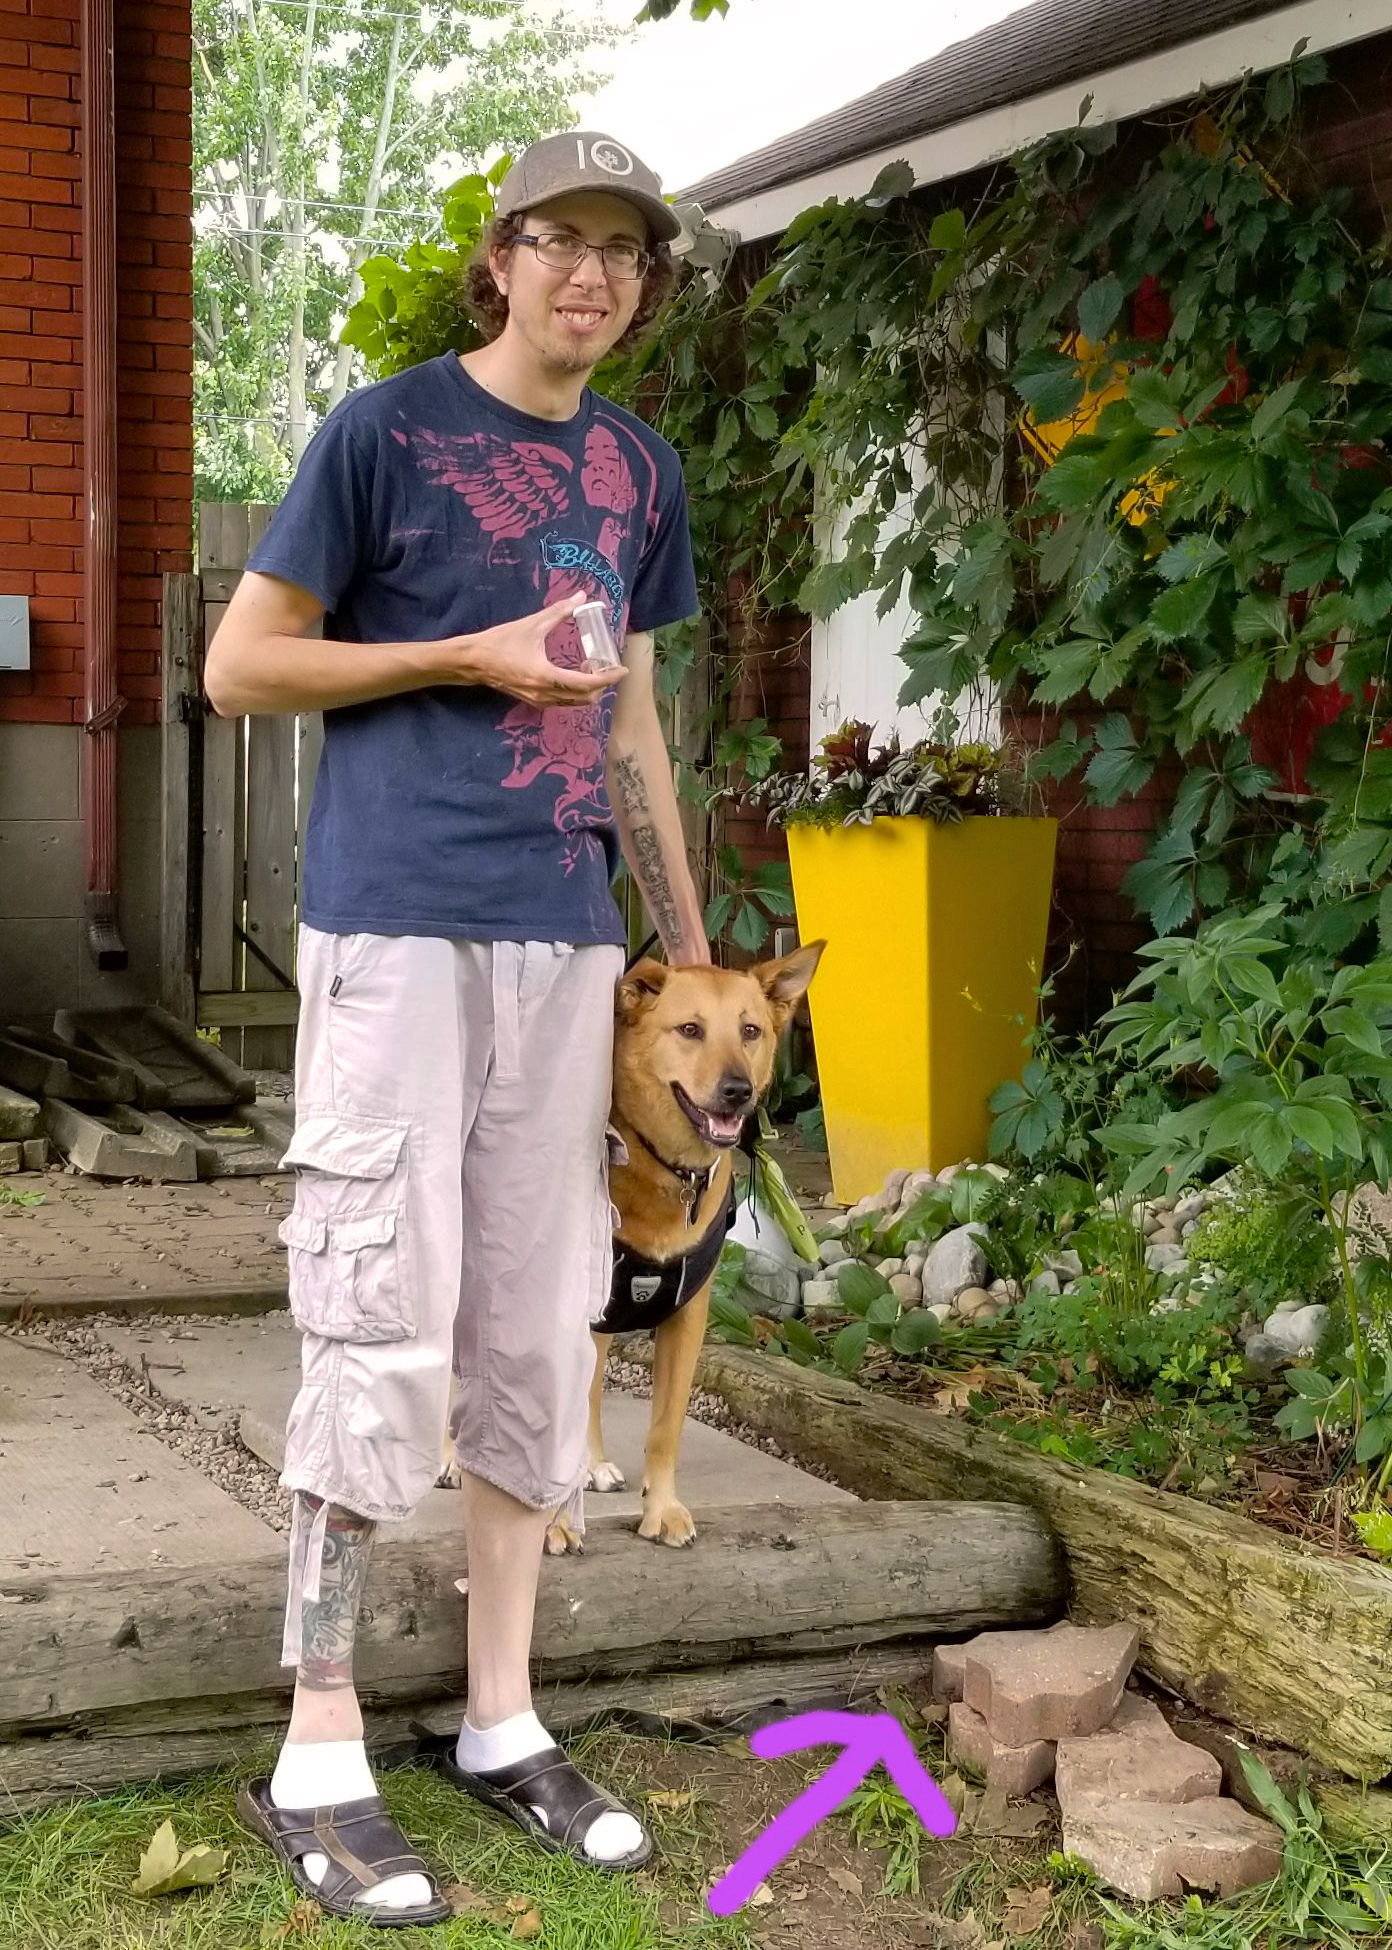 A thin man with tattoos on his arms and legs stands, smiling, with a leashed dog. The man is holding a small, plastic tube in one hand. There is a drawn-in pink arrow pointing to a cluster of pavers on the grass in front of him and his dog.